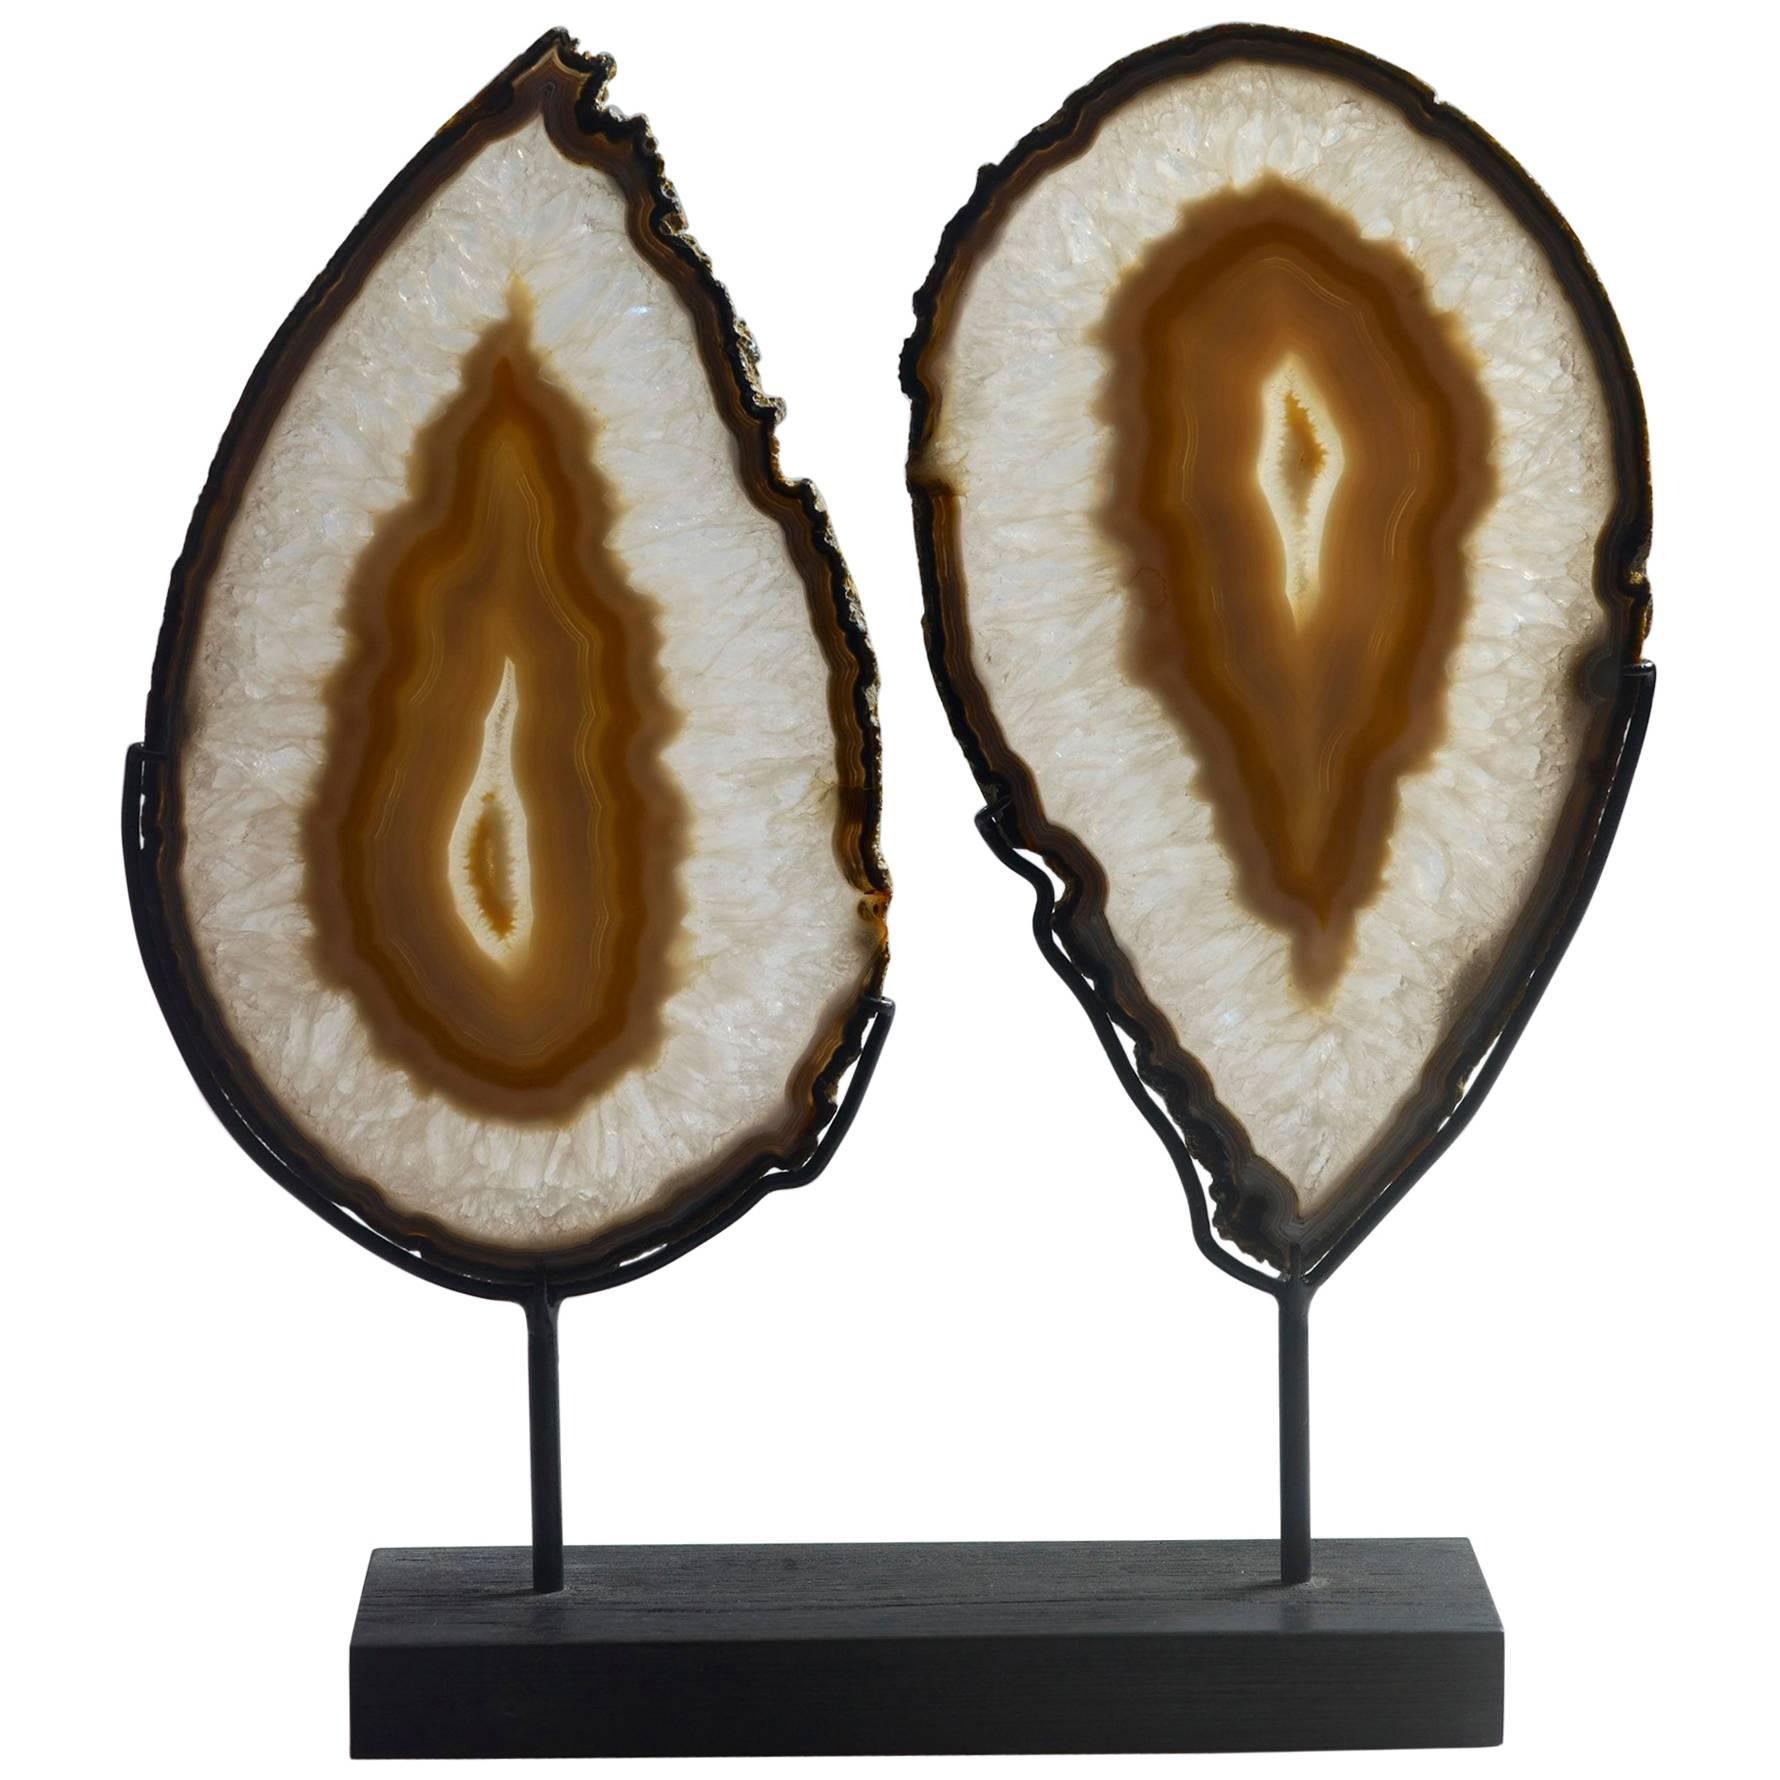 Lovely Pair of Matched Agate Slices